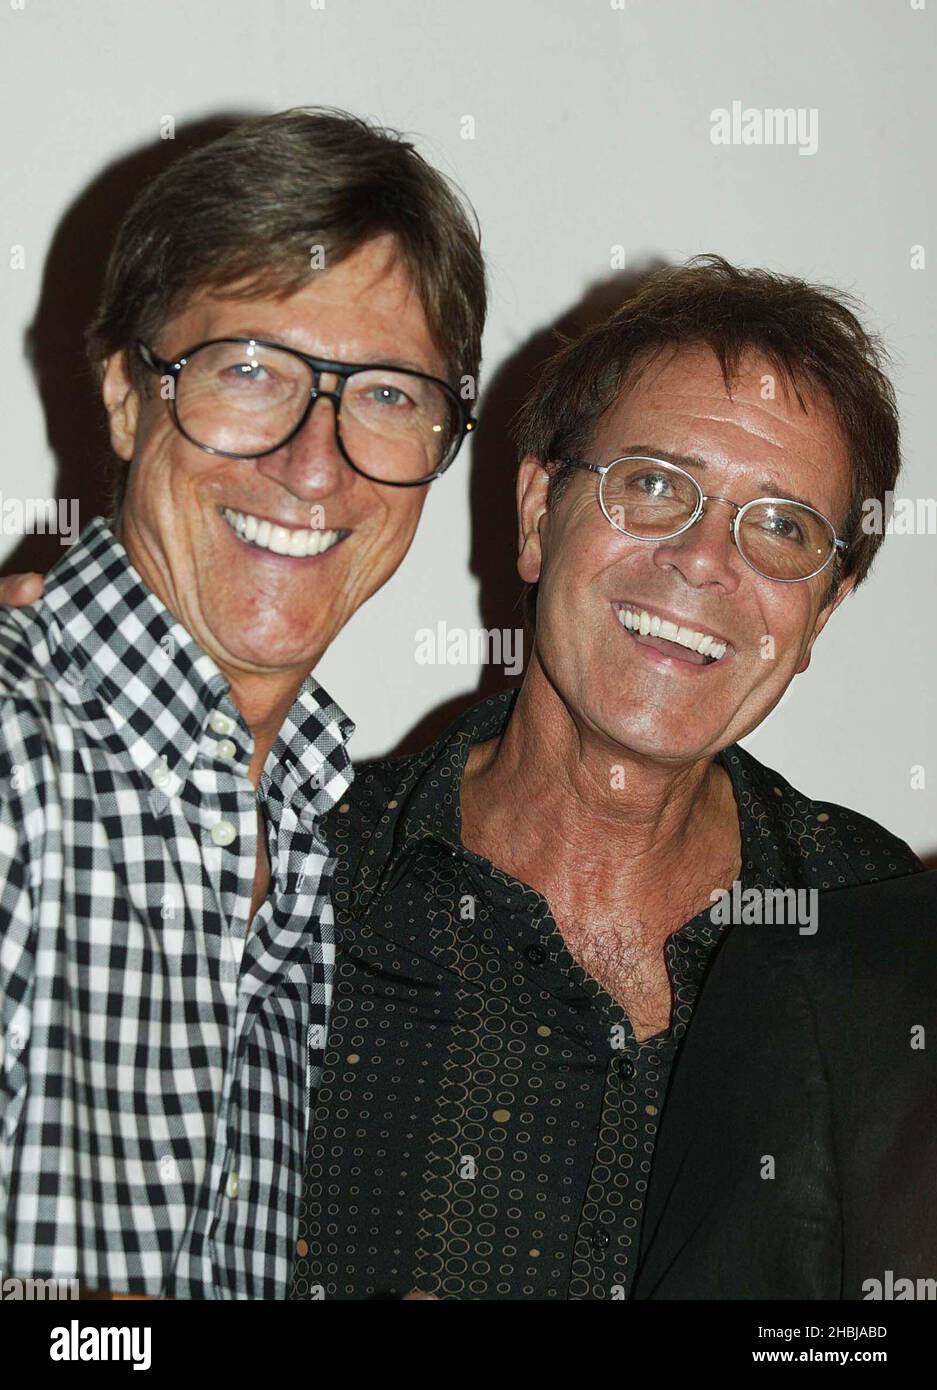 Cliff Richard and his former backing band The Shadows reunite for a photocall prior to the band's final date of last ever tour, at the London Palladium on June 14, 2004 in London. Cliff presents his former backing band with a special gold disc to mark over 100,000 sales of double CD 'Life Story - The Very Best Of The Shadows' which has been in the UK album charts since its release in April.   Hank B Marvin Stock Photo